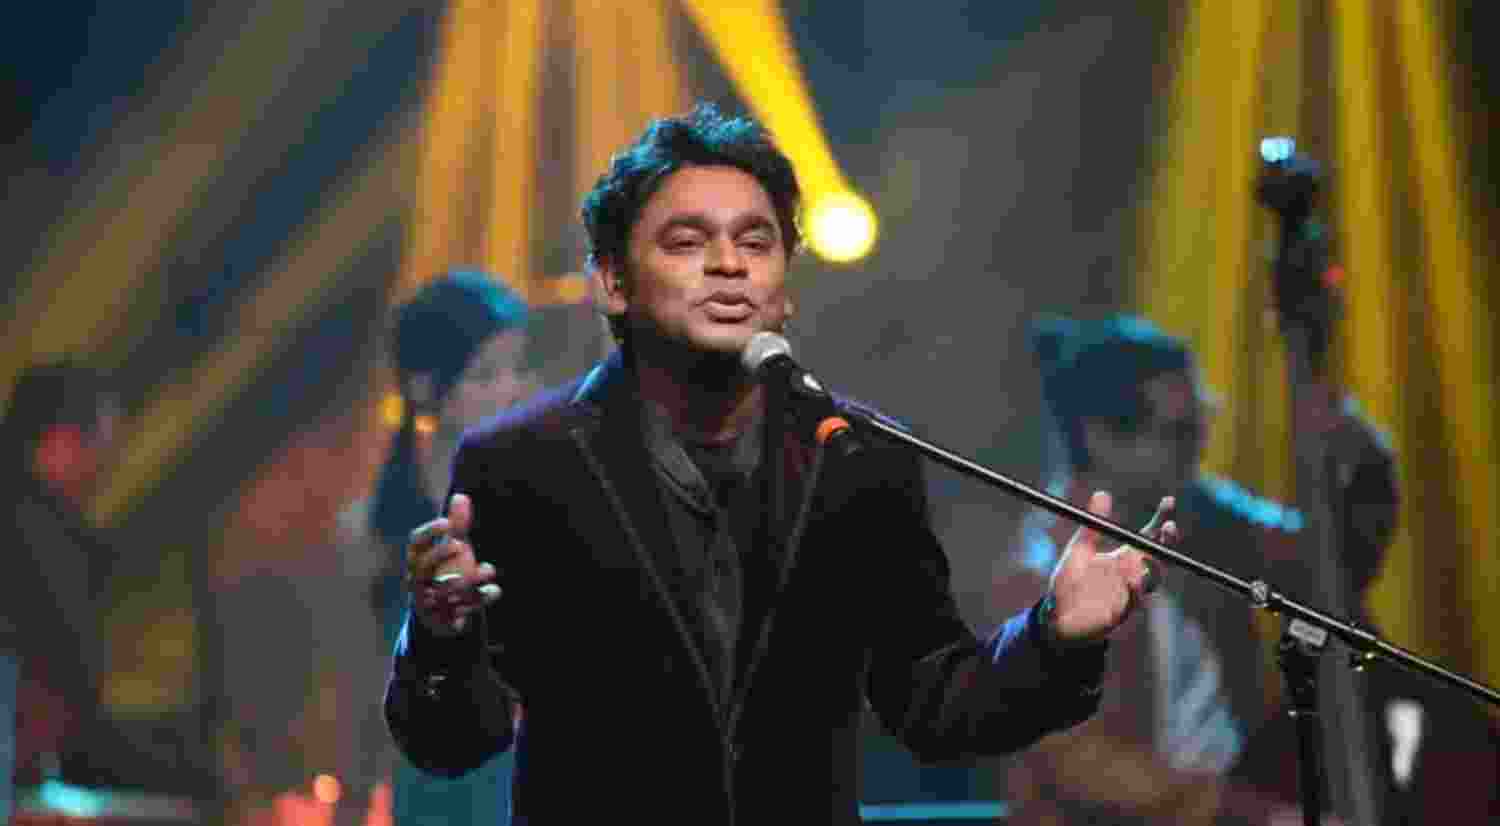 Rahman praises India's young filmmakers at Cannes